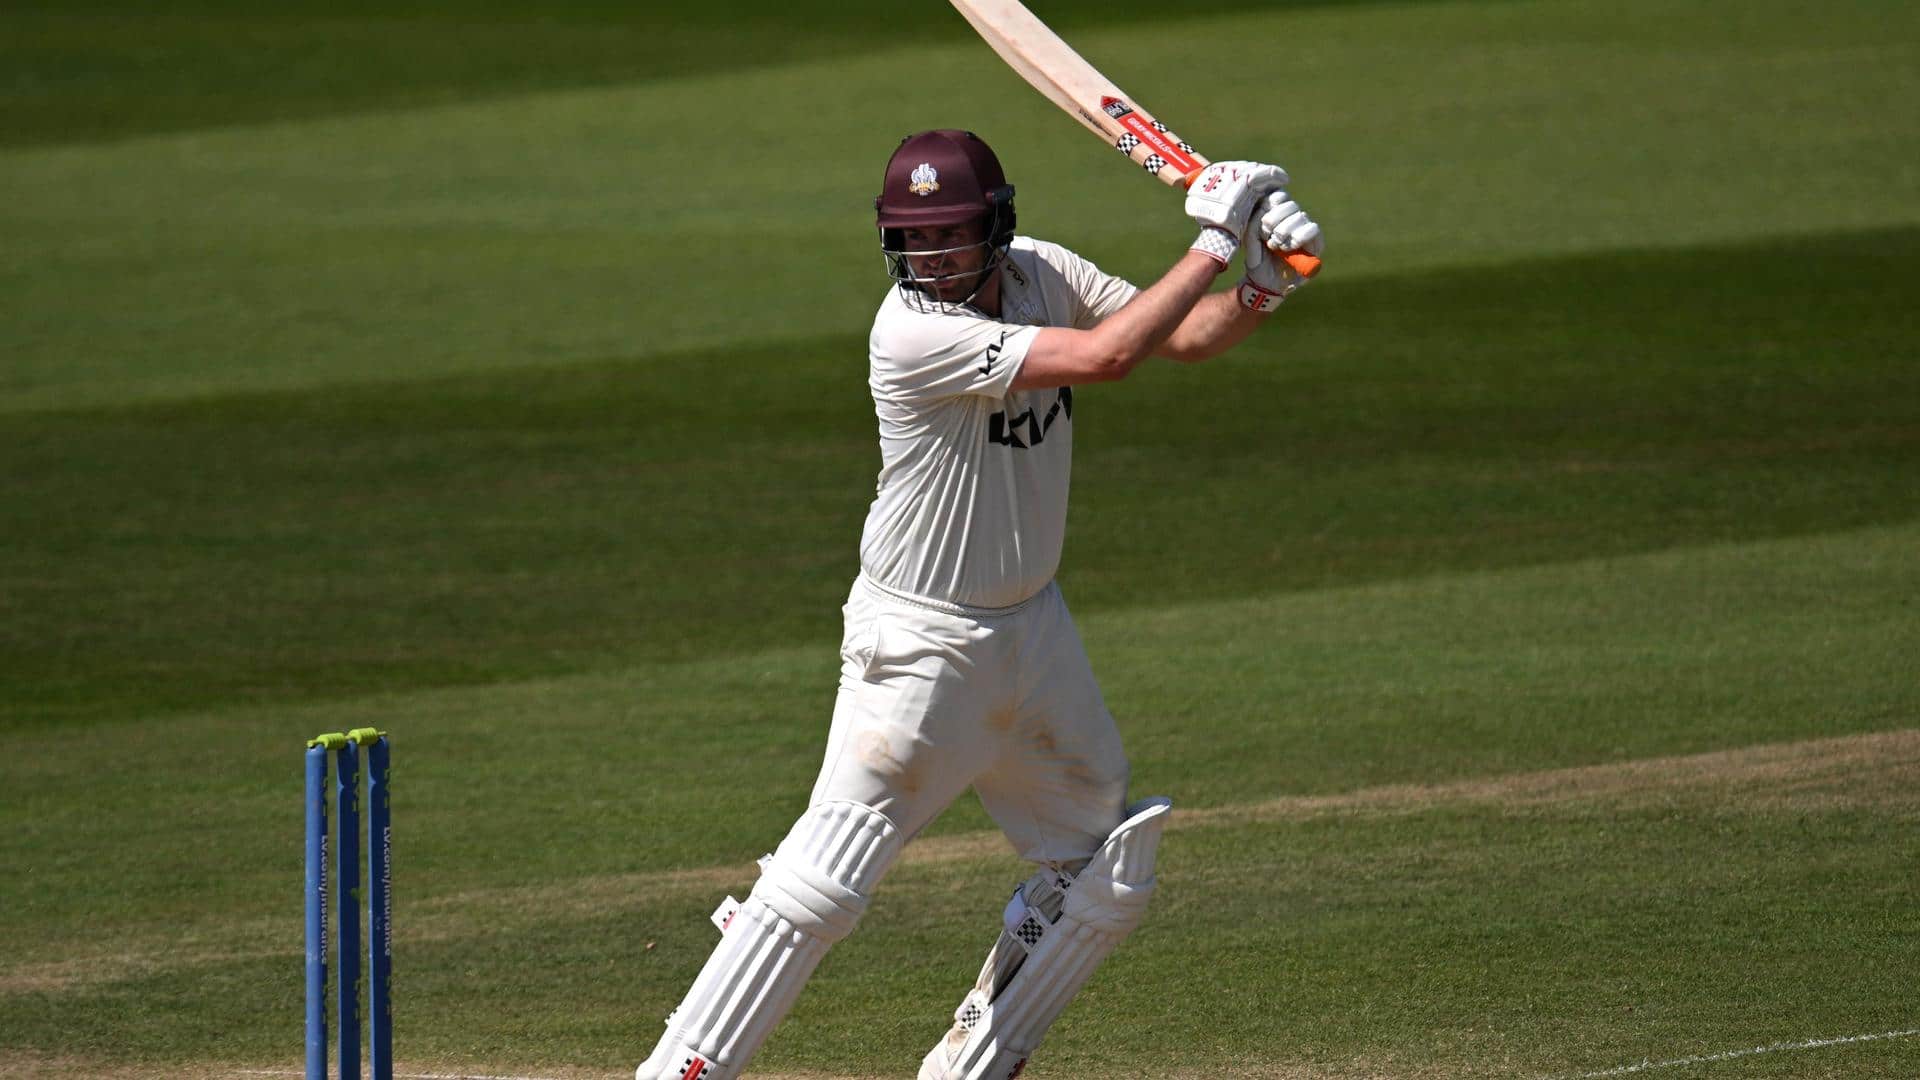 Surrey complete second-highest run chase in County Championship history: Stats